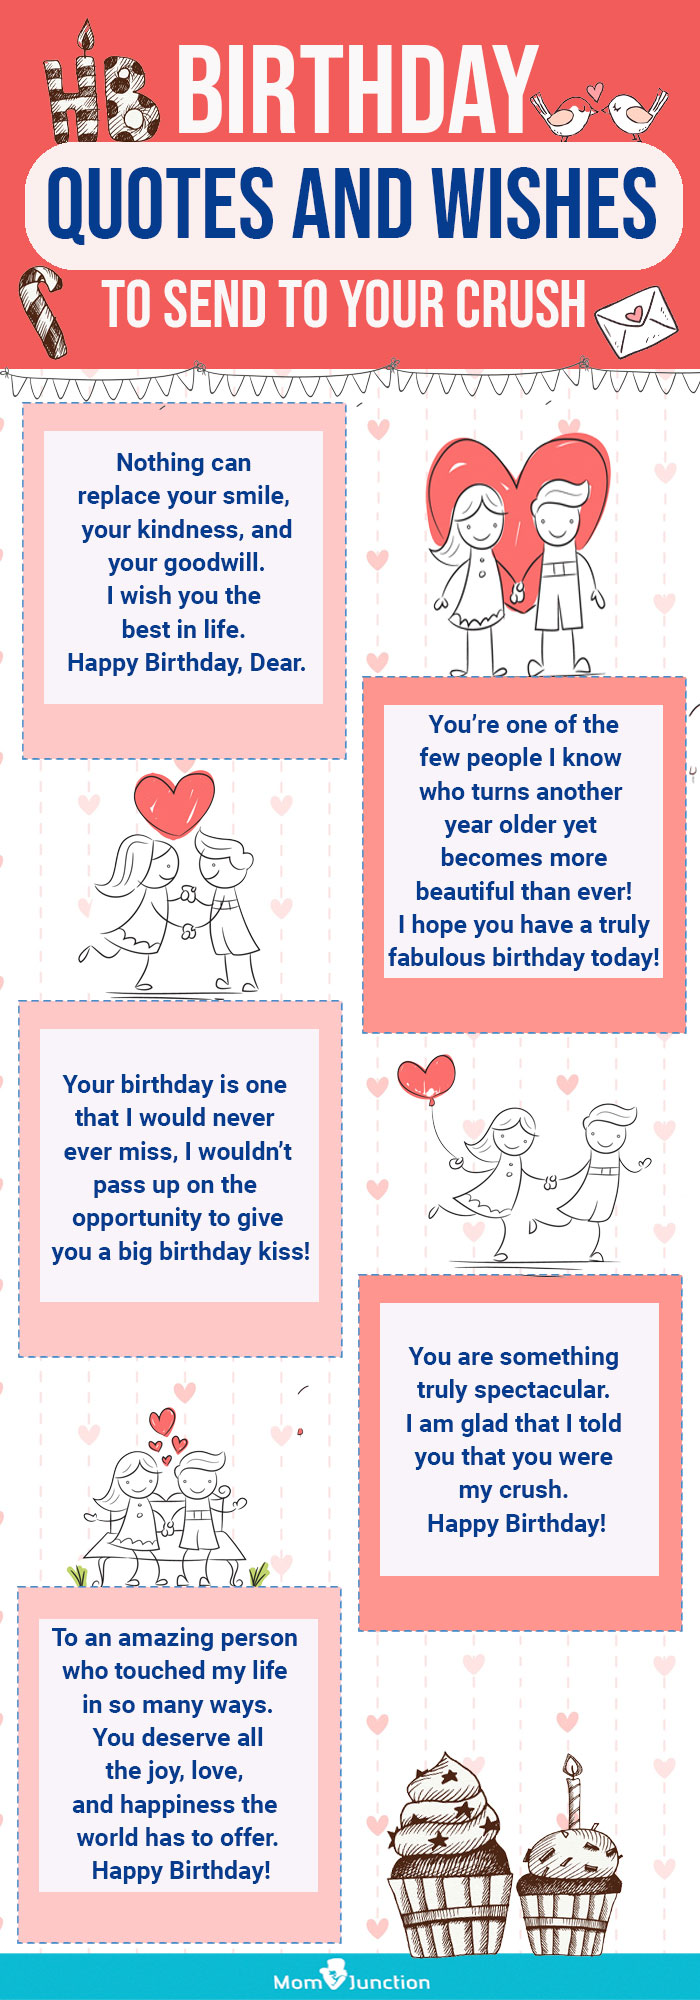 birthday quotes and wishes for crush (infographic)